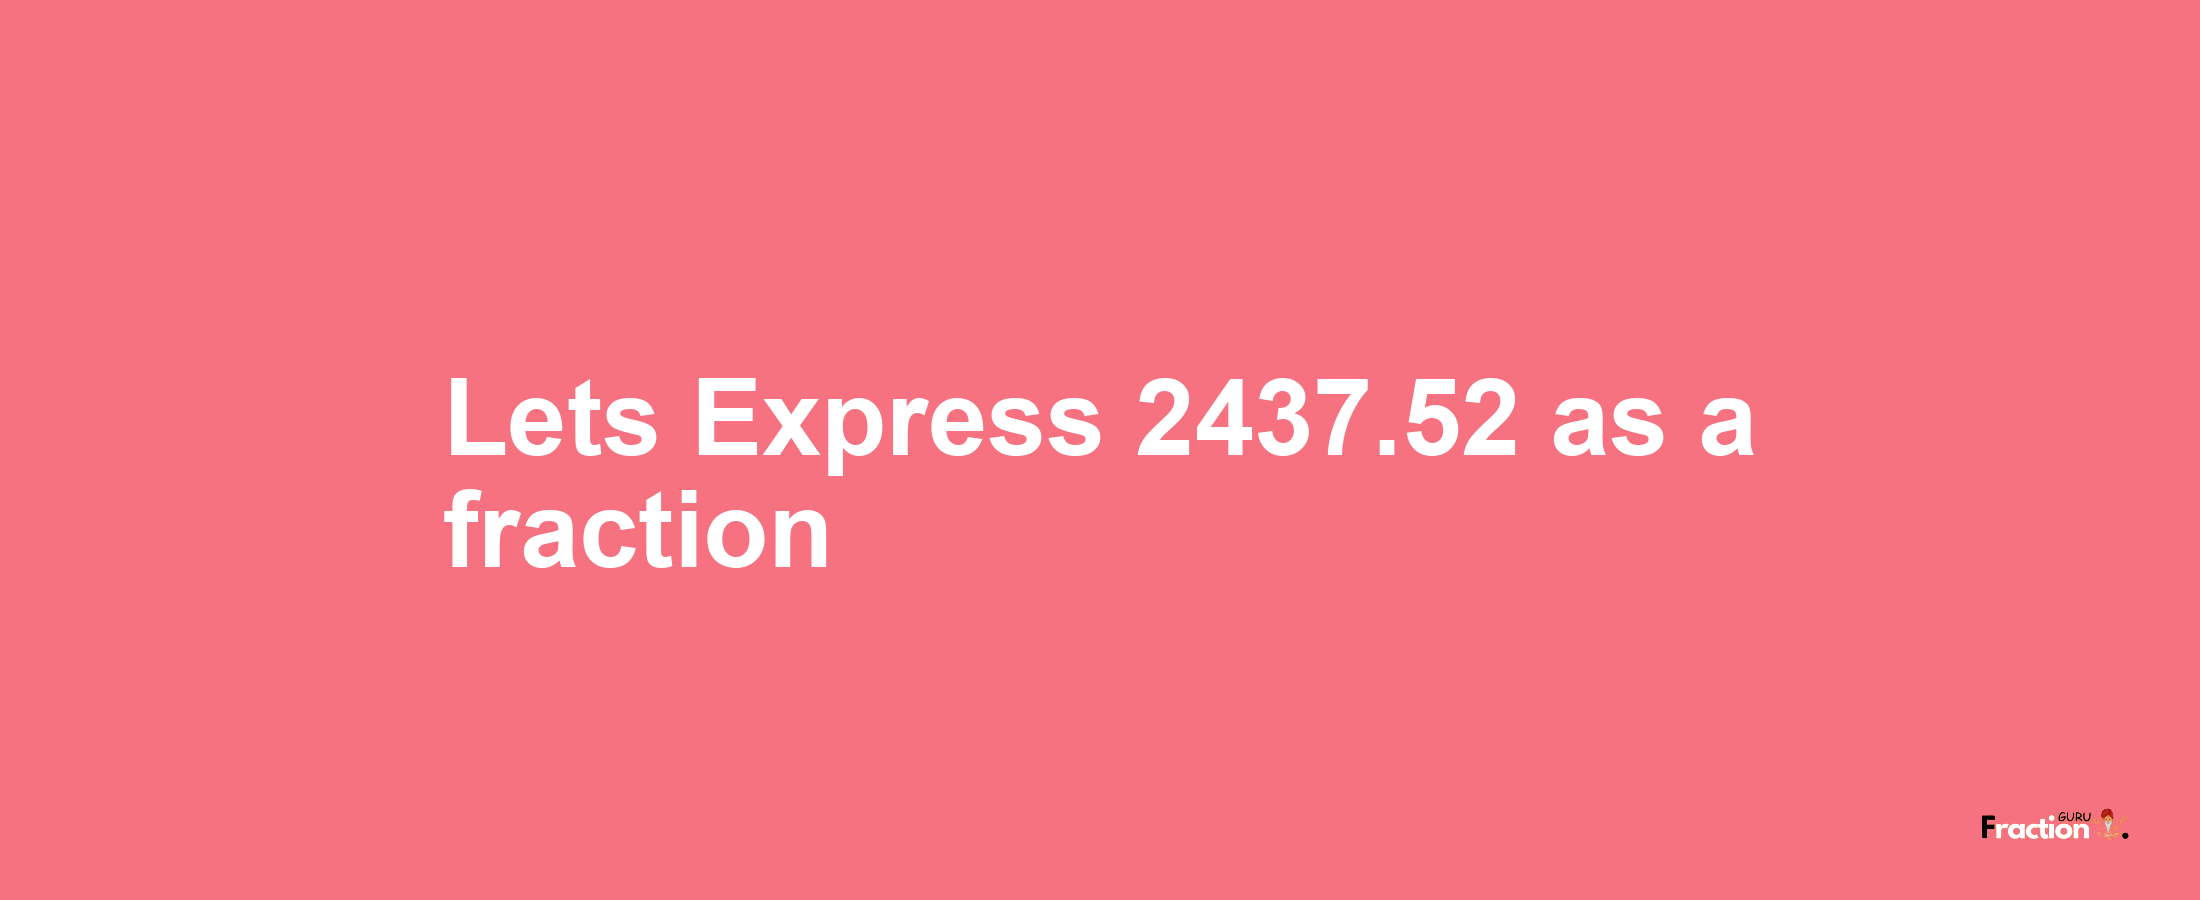 Lets Express 2437.52 as afraction